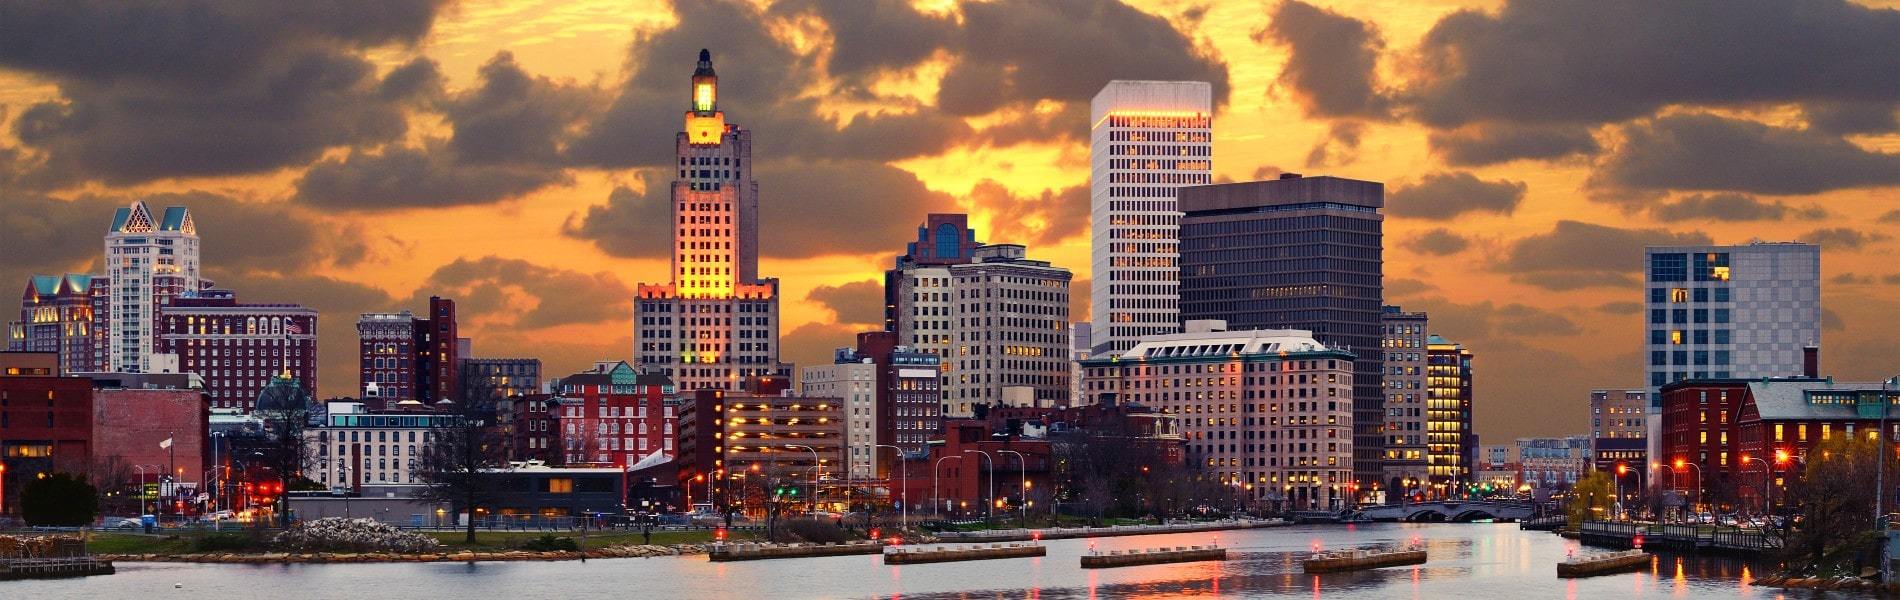 Sunset view of Providence, Rhode Island 